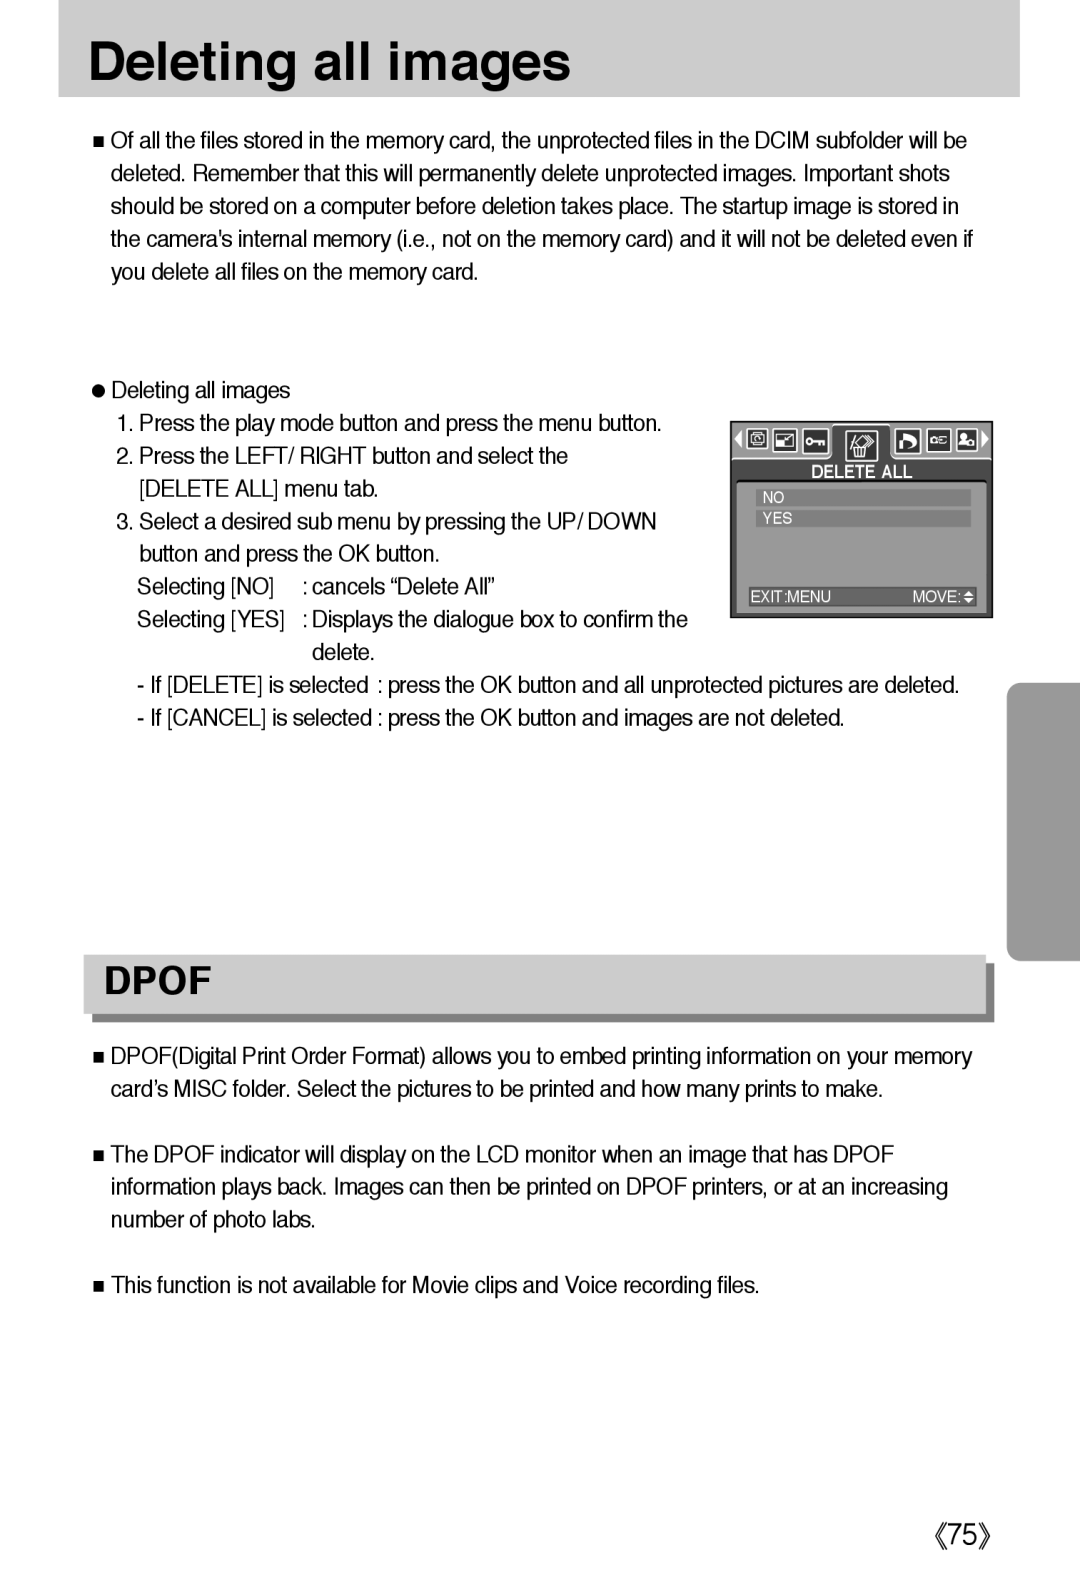 Samsung L50 user manual Deleting all images, Dpof, 《75》 